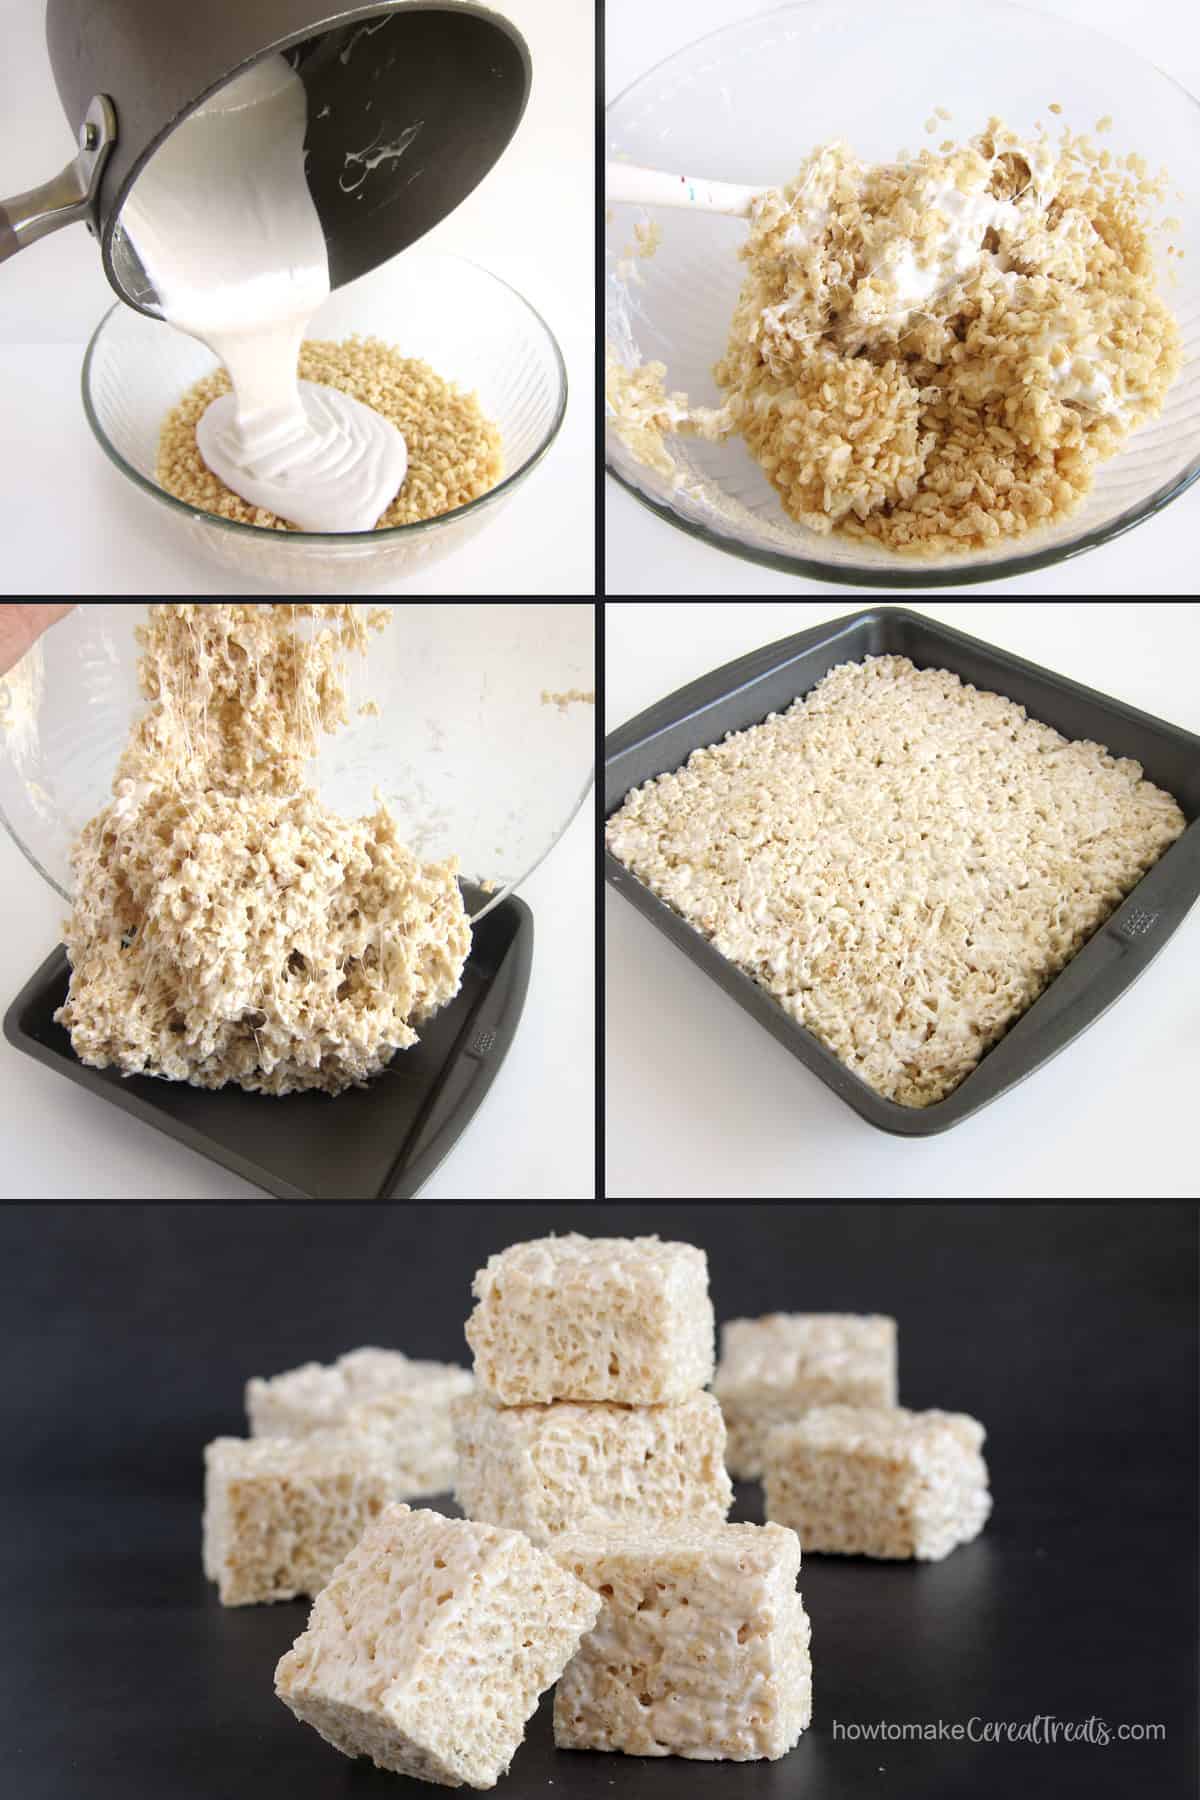 pour melted marshmallows and coconut oil over rice crispy cereal, then spread it in a pan